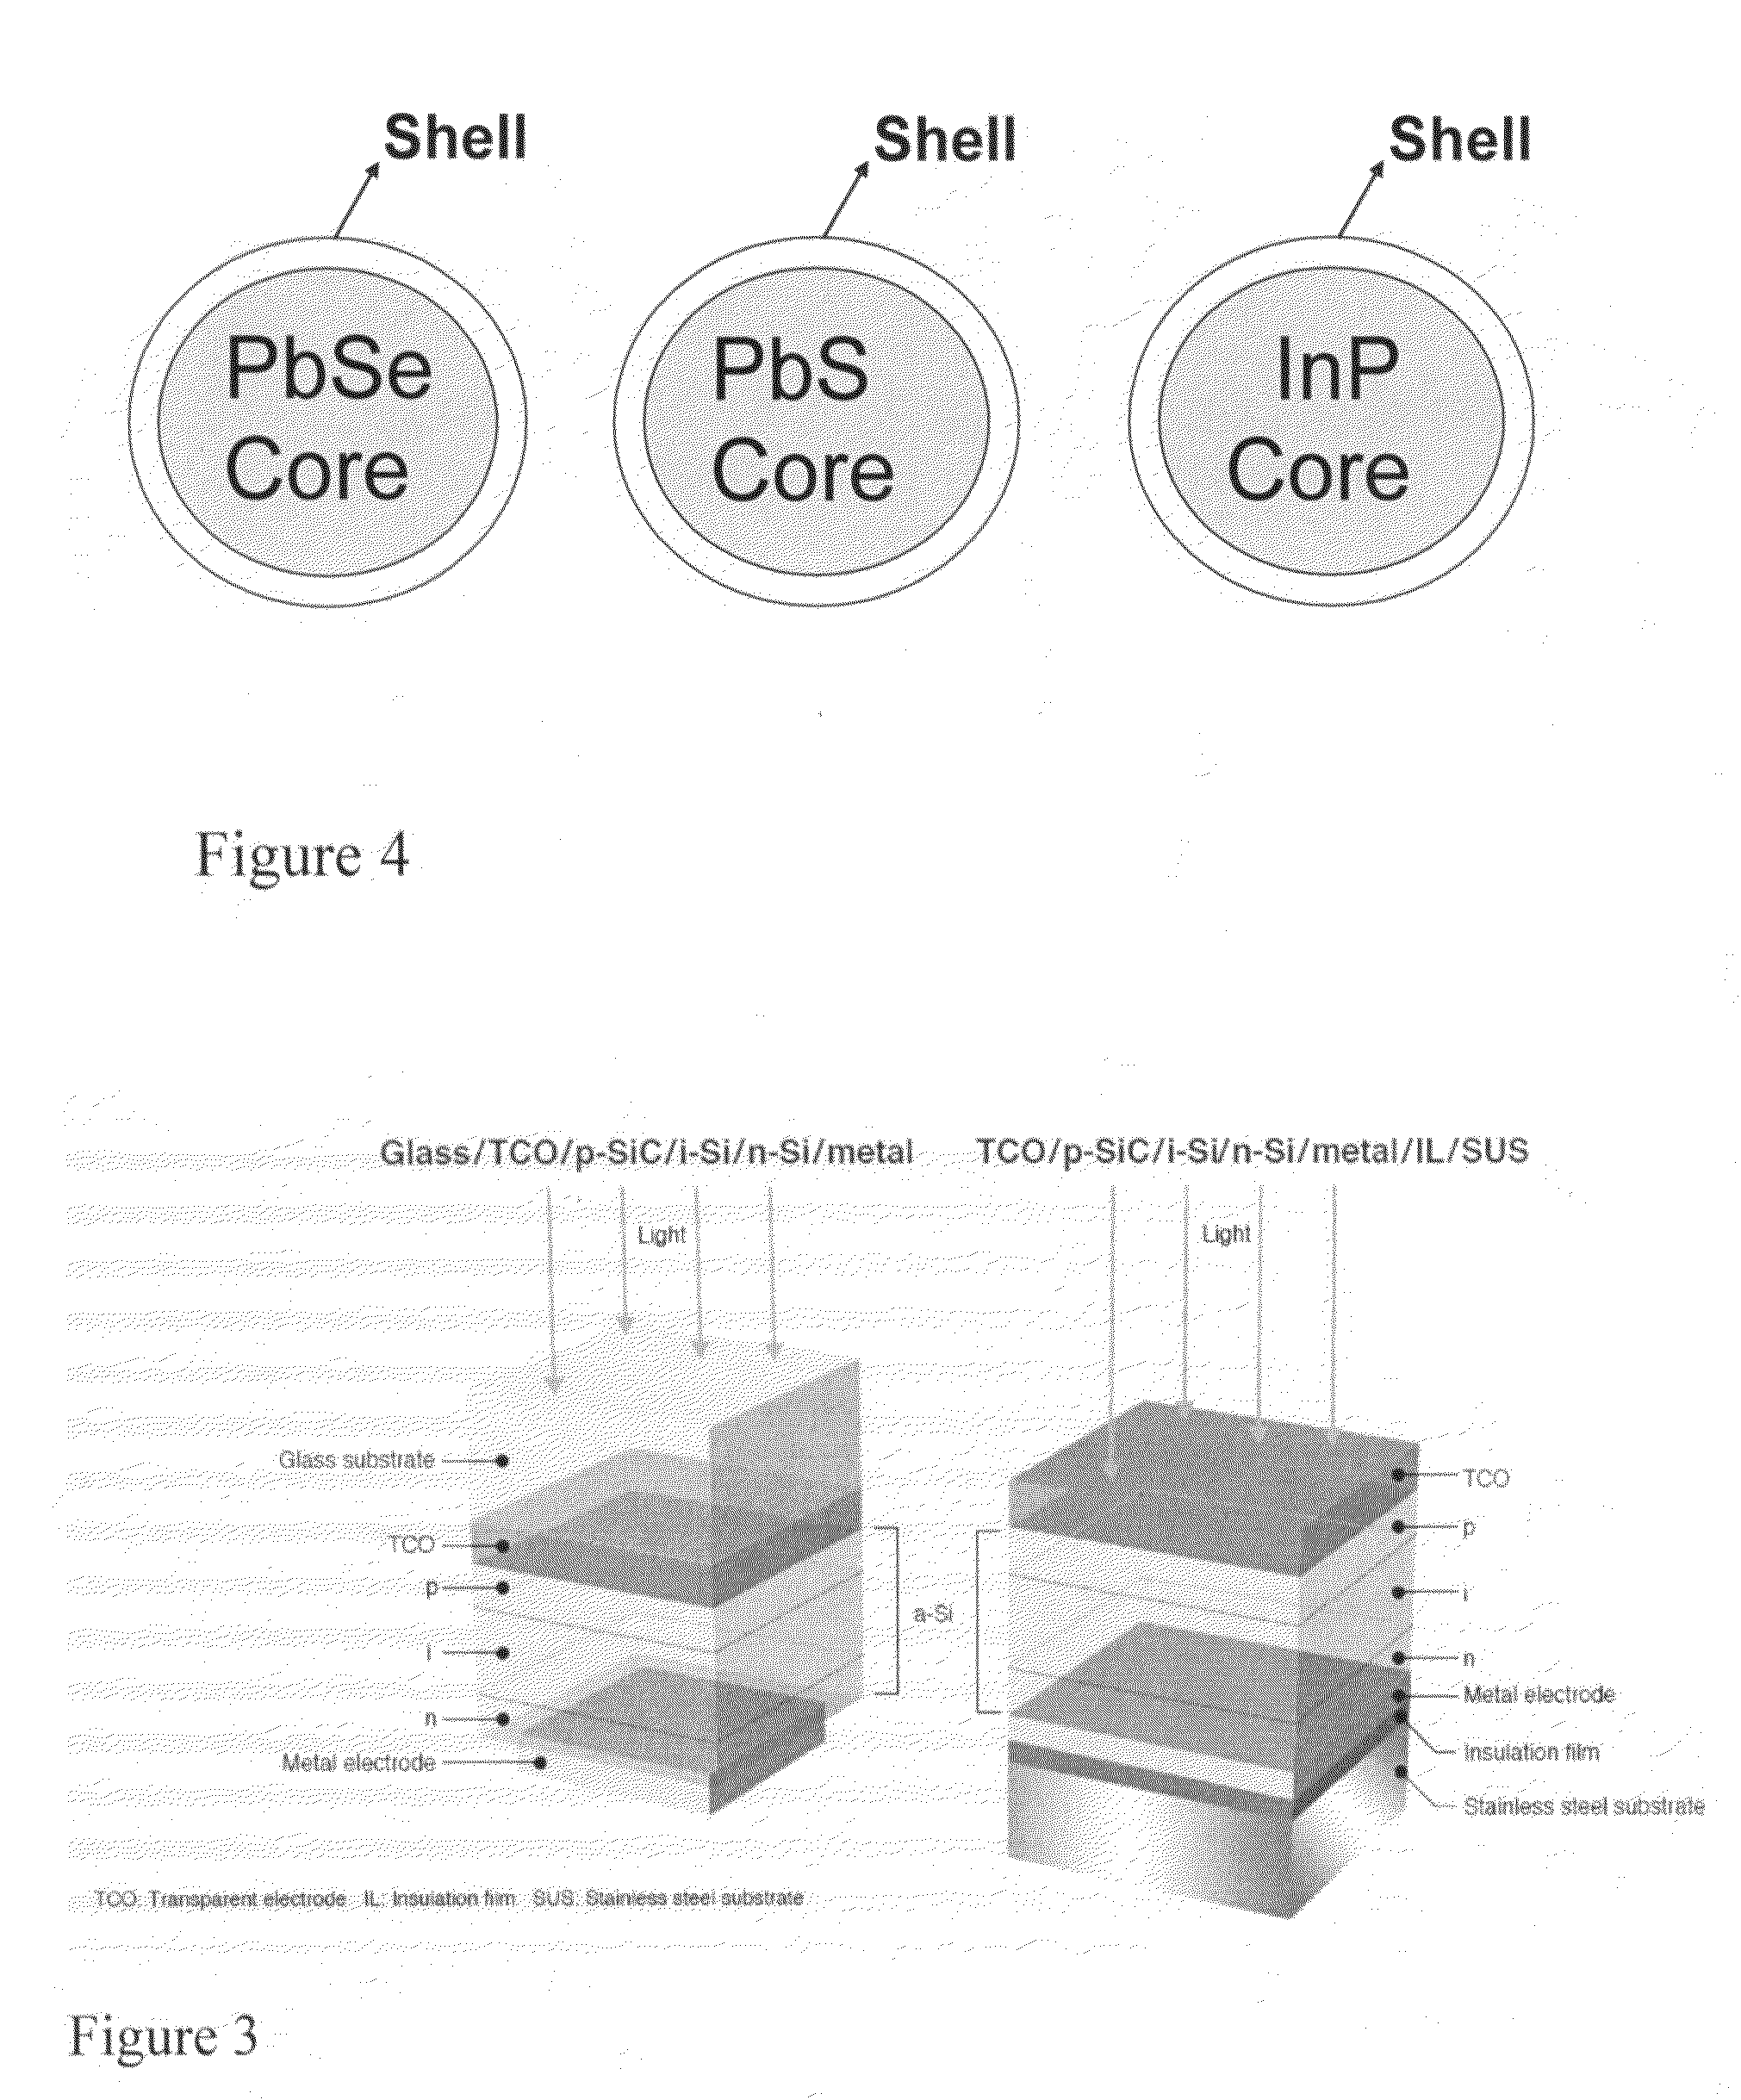 Photovoltaic device with nanostructured layers